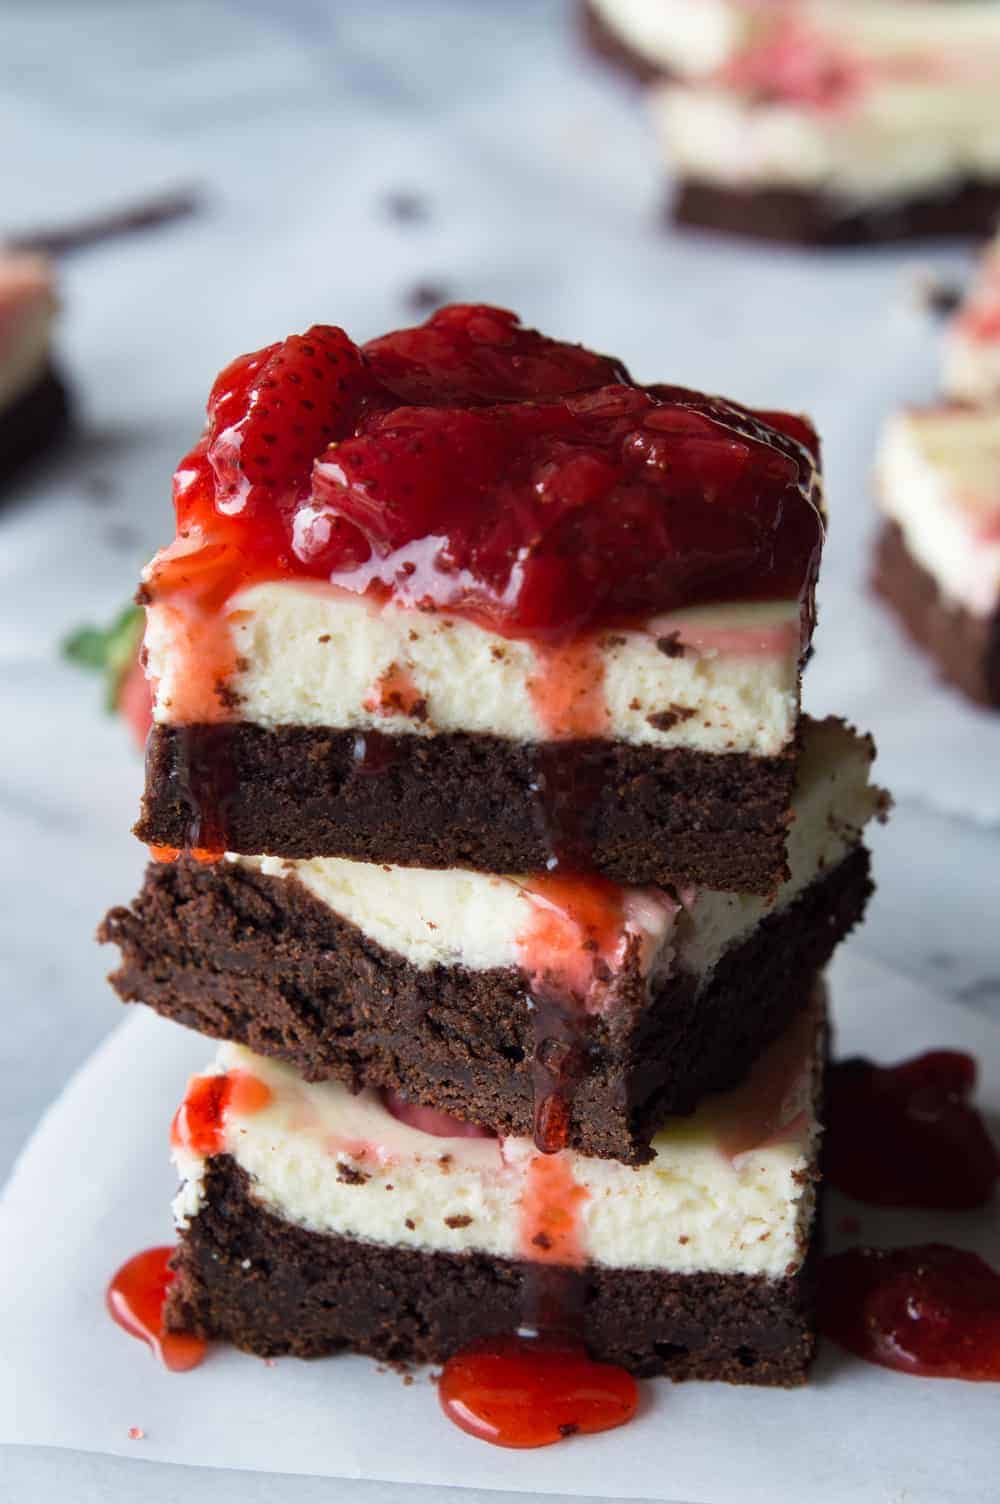 Strawberry Cheesecake Brownies. These homemade brownies are loaded up with a layer of creamy cheesecake then swirled with a sweet strawberry sauce for a pop of color and flavor! Spoon the extra strawberry sauce over the top for an extra special dessert!